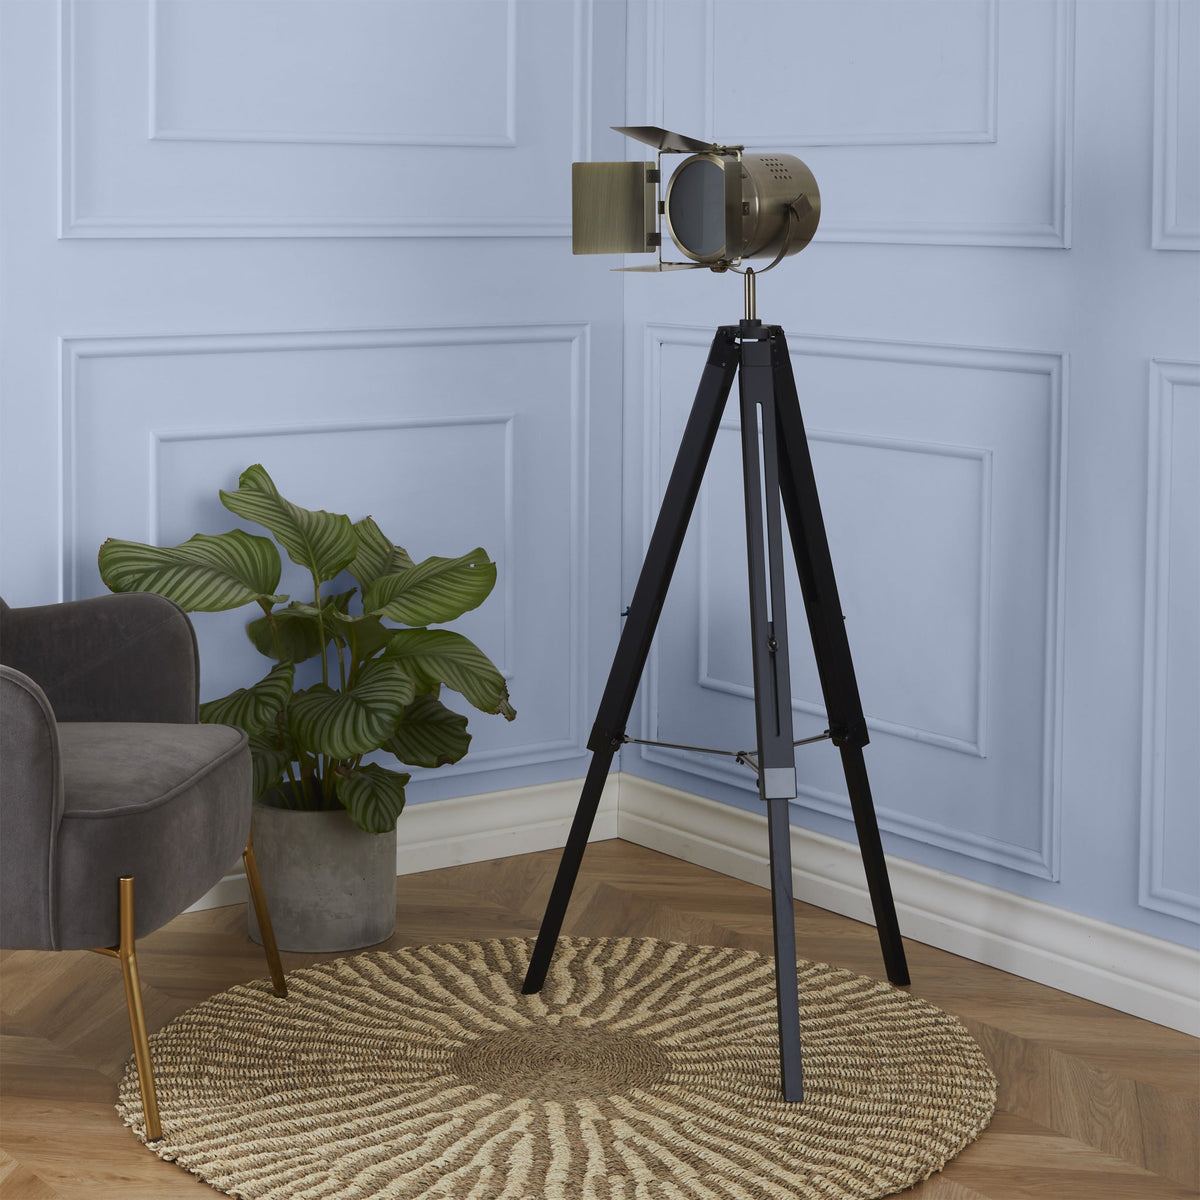 Hereford Antique Brass and Wood Tripod Film Floor Lamp